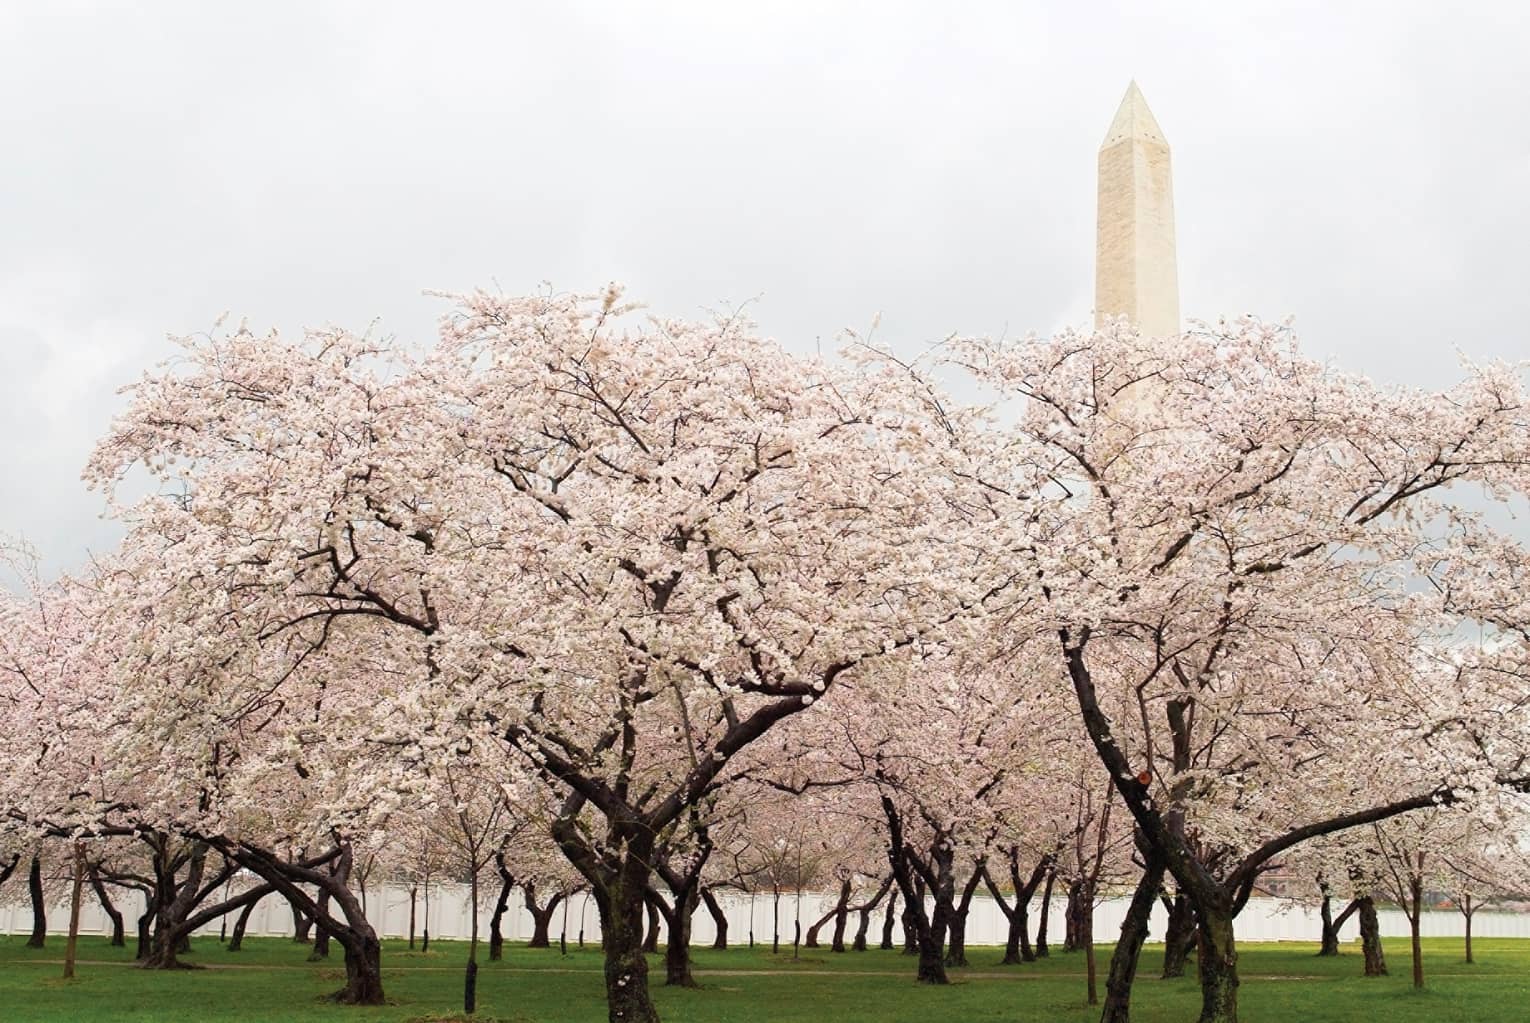 Cherry blossoms on tree with Washington Monument in background